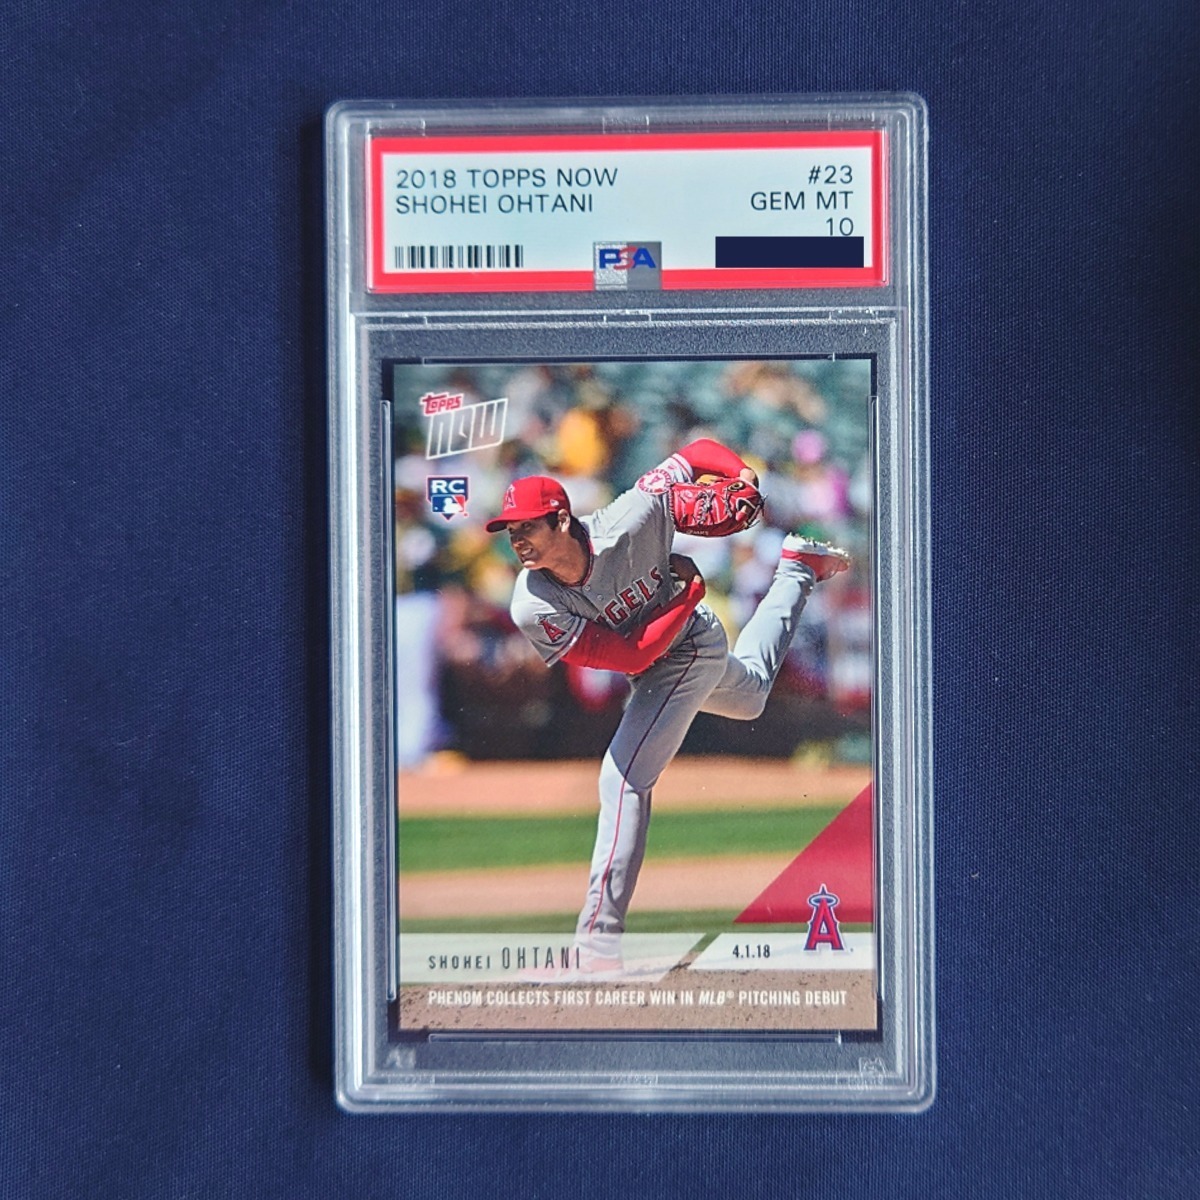 ◆【PSA 10 ／ RC】2018 SHOHEI OHTANI TOPPS NOW card#23 GEM MT 10 大谷翔平 初勝利 Rookie（ルーキー）カード